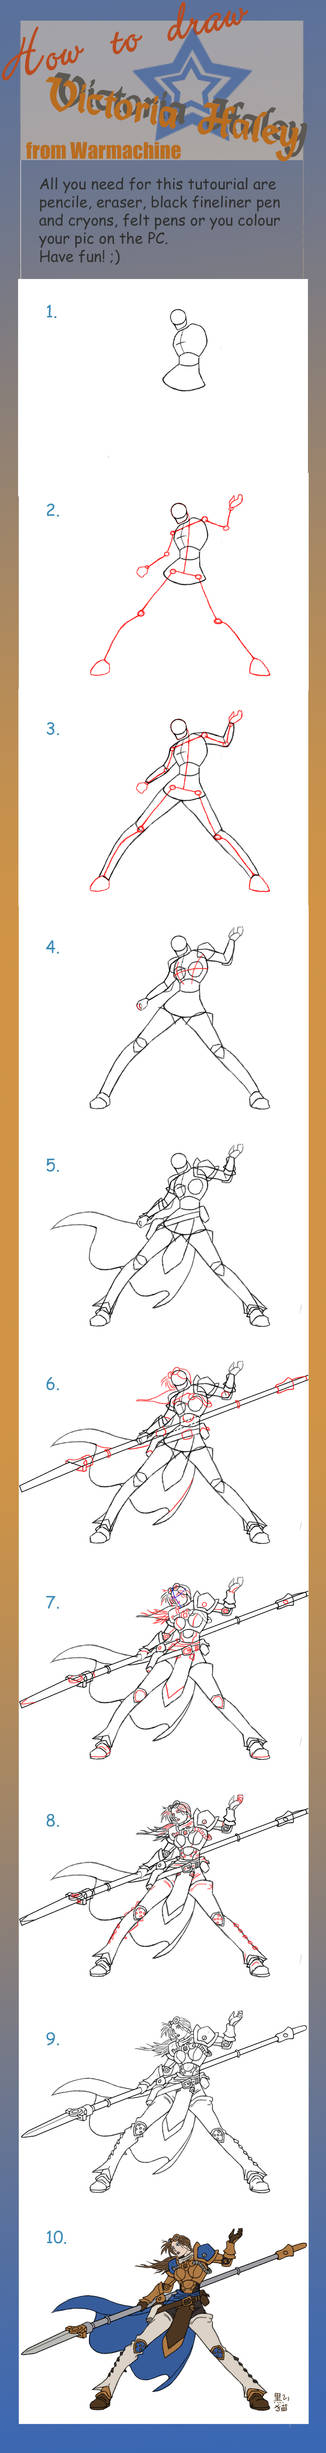 How To Draw Victoria Haley